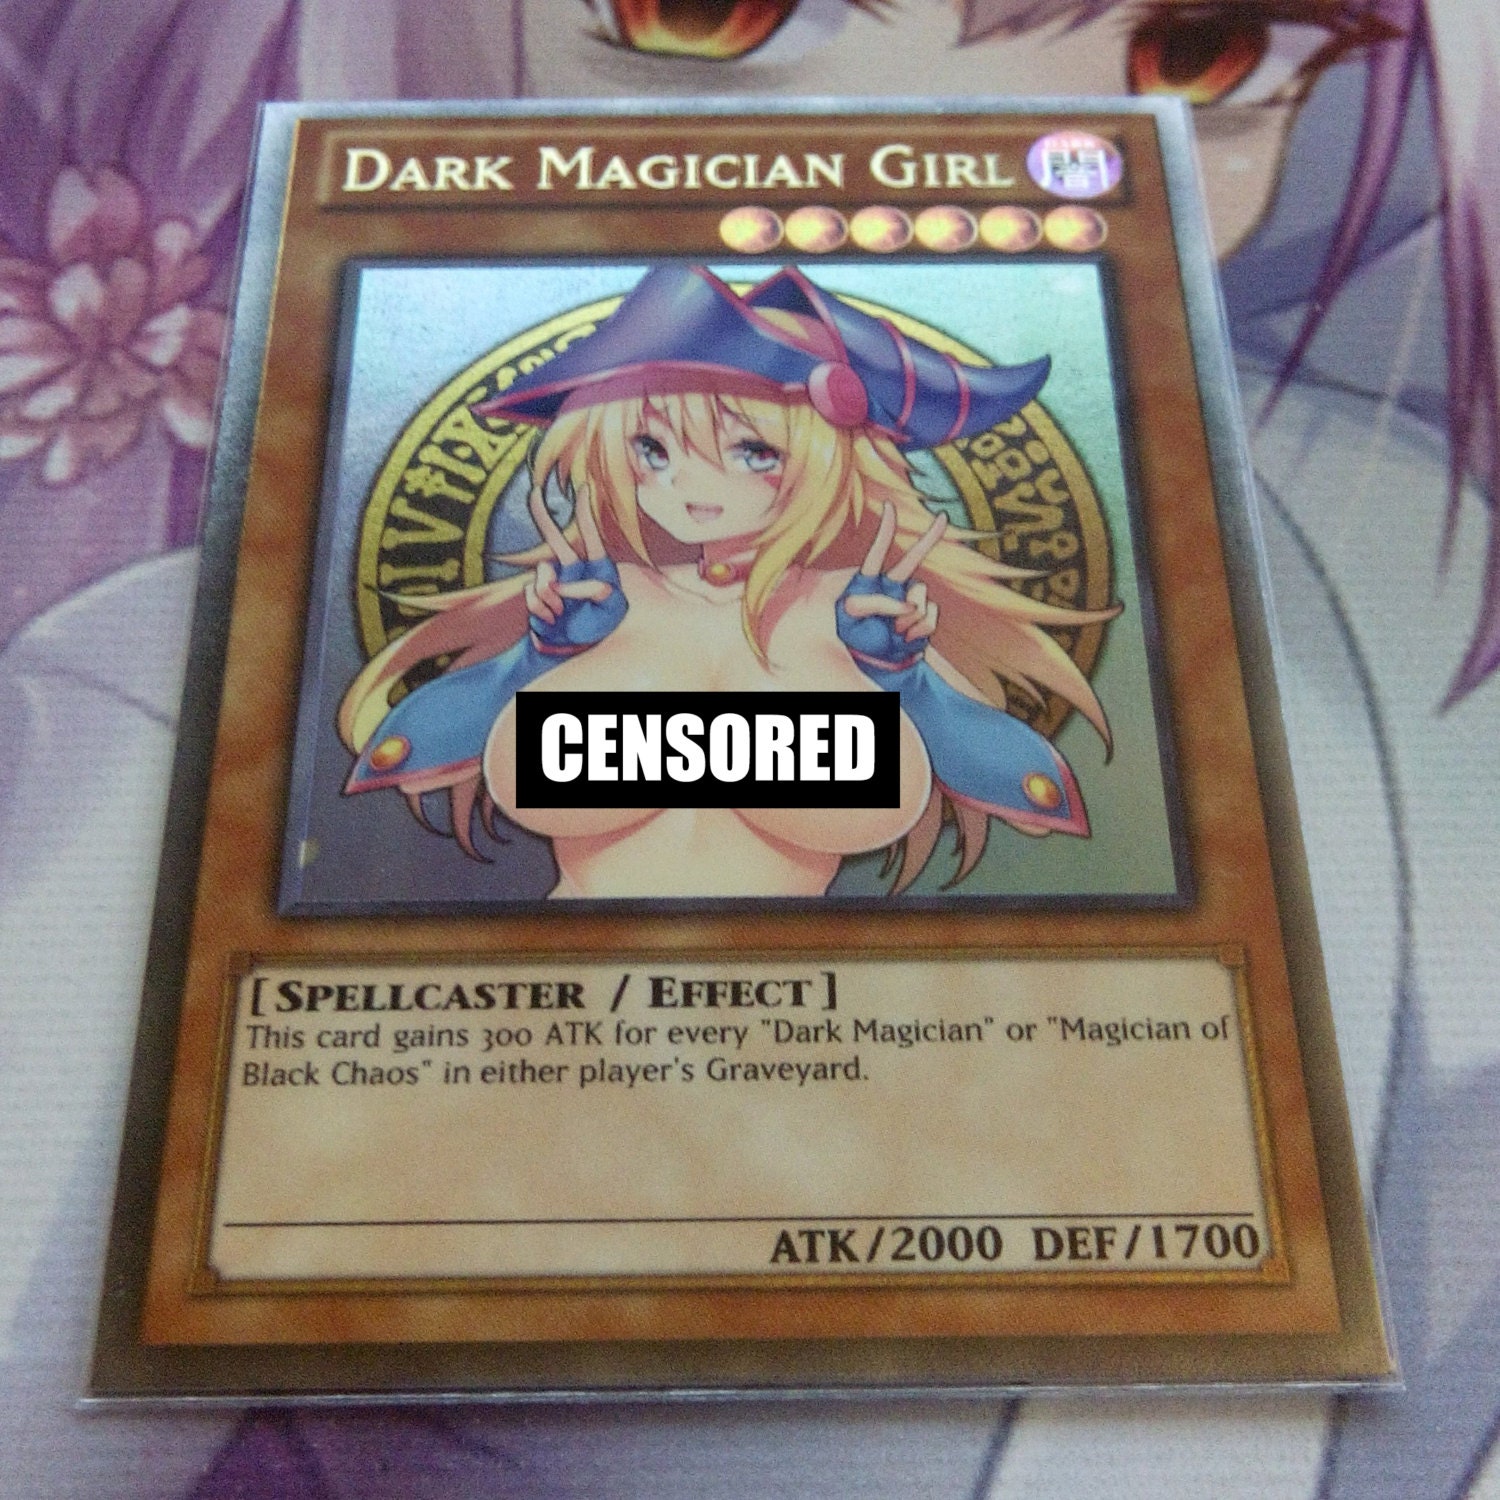 ann jeansonne recommends Sexy Magician Girl